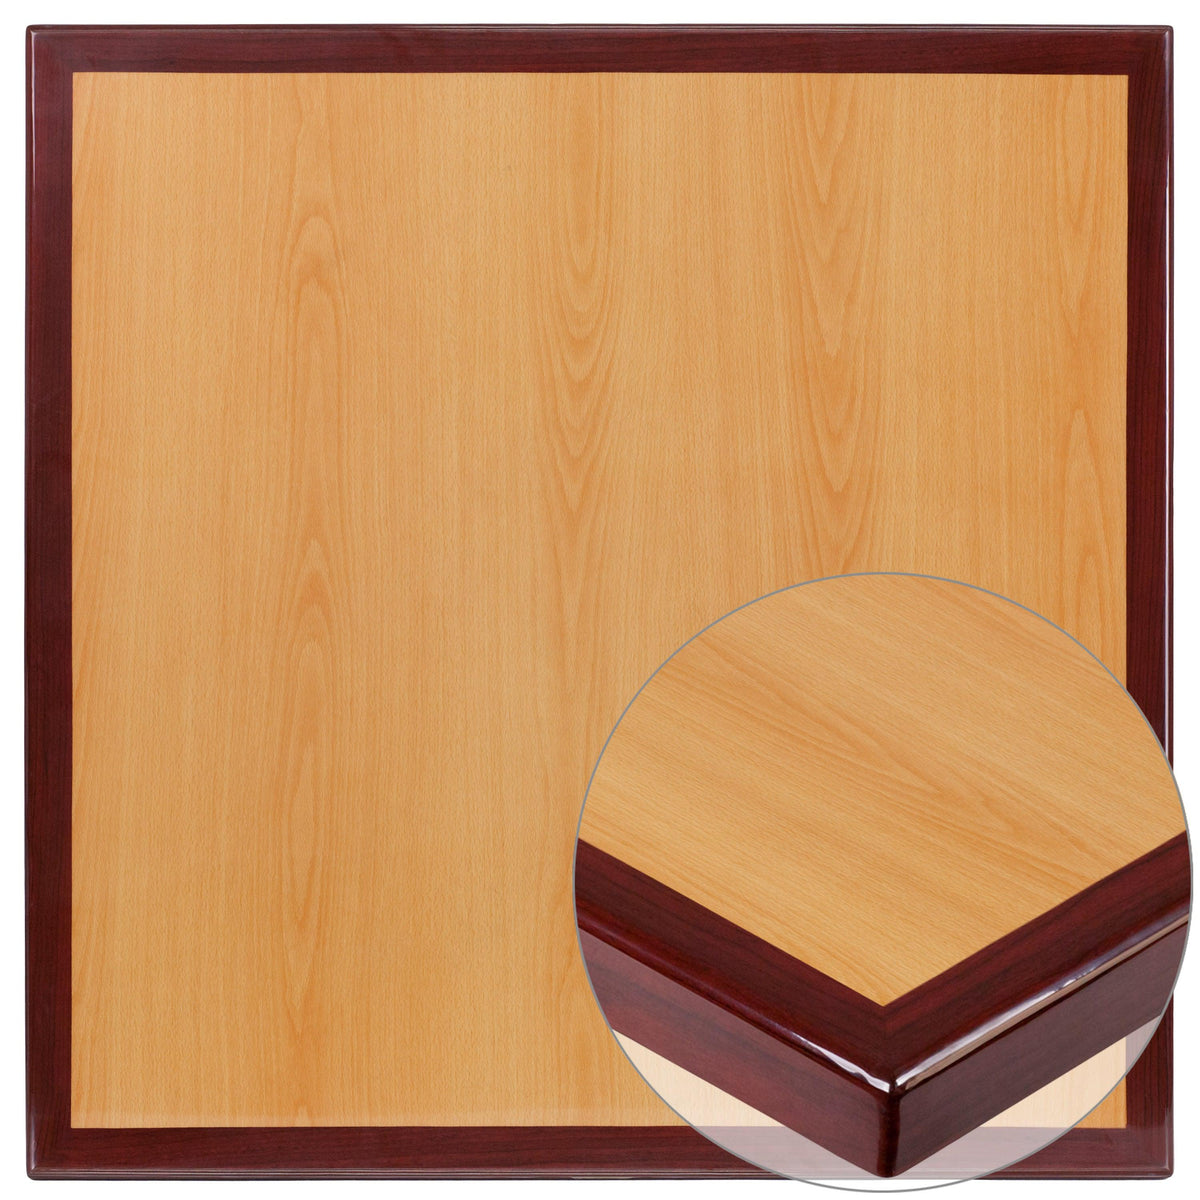 30inch Square High-Gloss Cherry & Mahogany Resin Table Top with 2inch Thick Drop-Lip